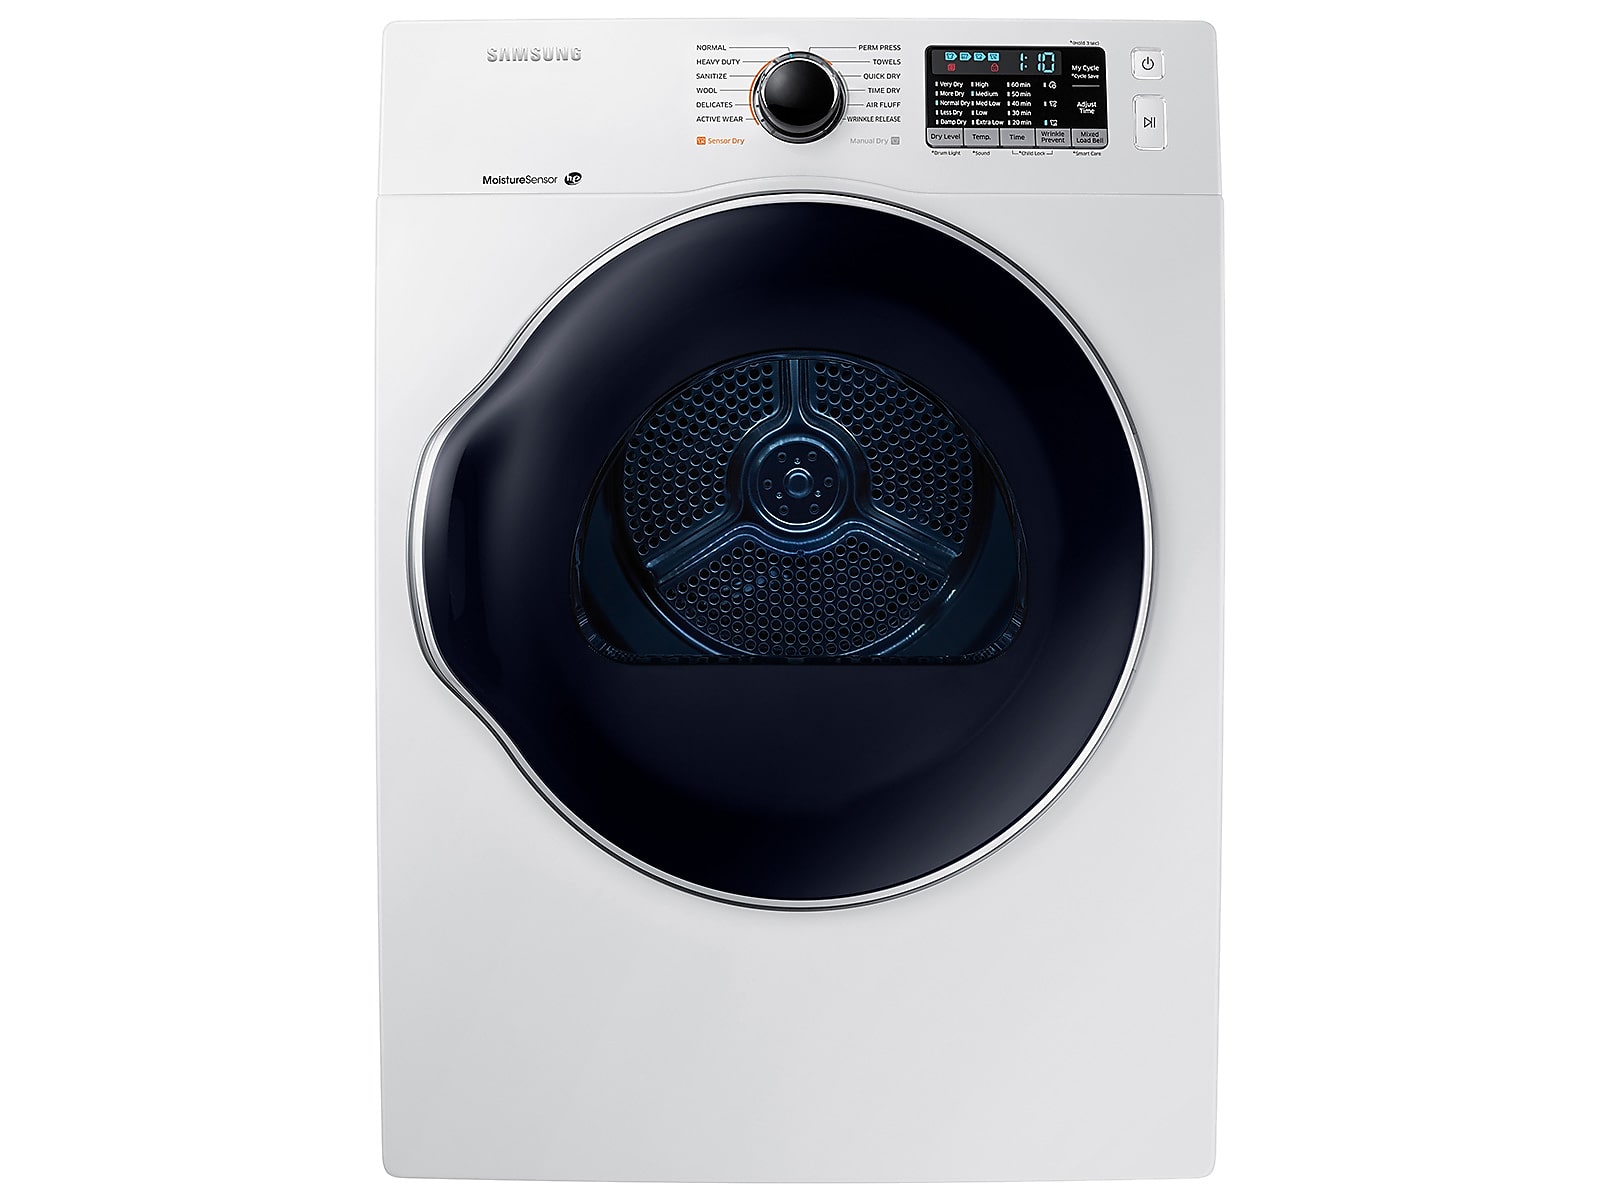 Samsung 4.0 cu. ft. Capacity Electric Dryer with Sensor Dry in White(DV22K6800EW/A1)